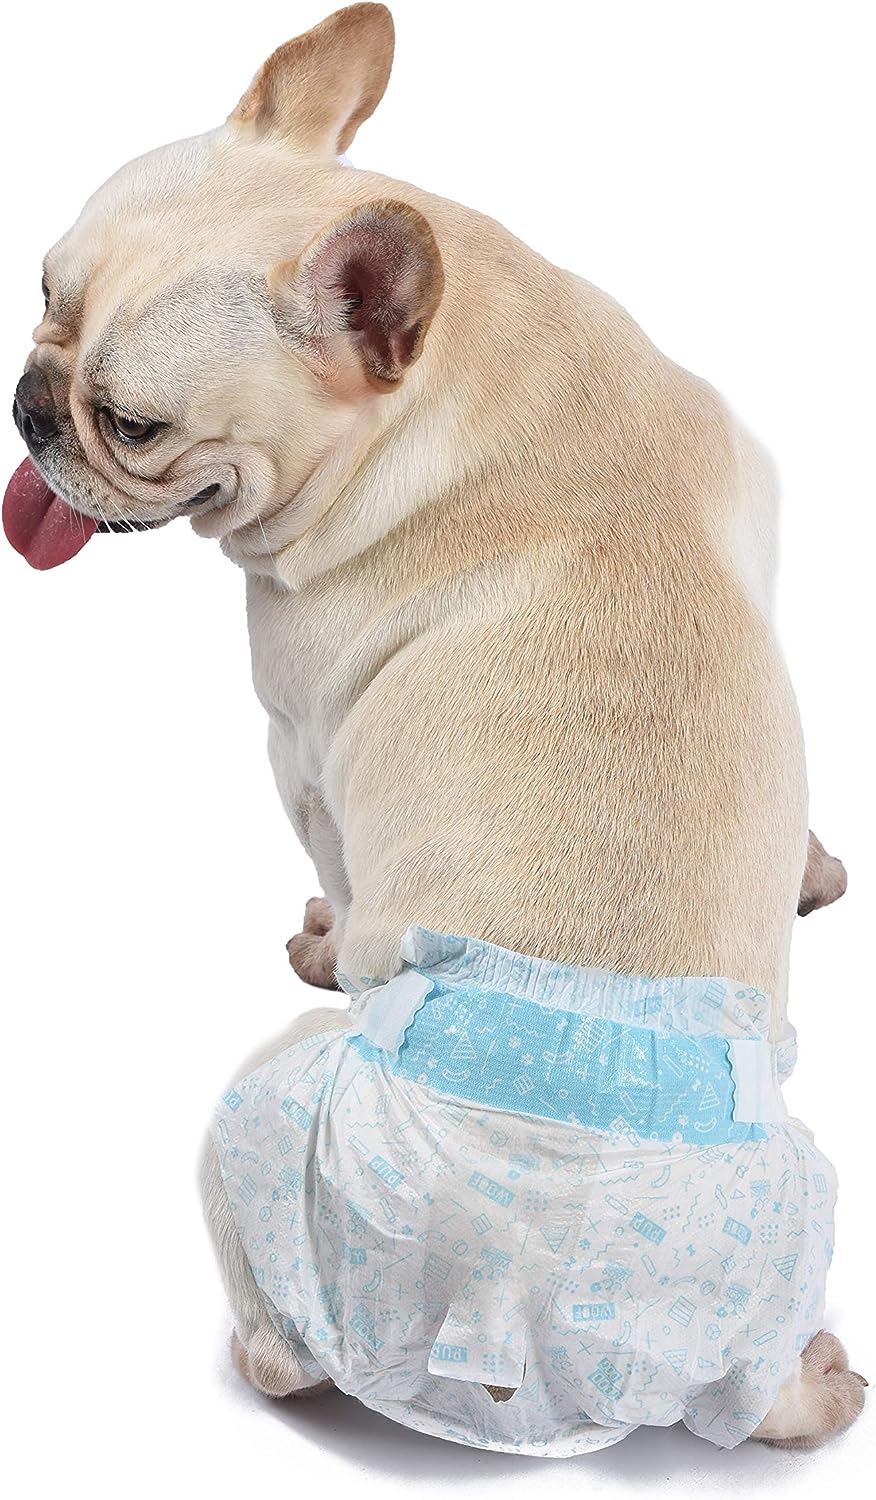 Wags & Wiggles Female Dog Diapers | Doggie Diapers for Female Dogs | Small Dog Diapers, 15"-19" Waist - 12 Pack | Disposable Dog Diapers for Female Dogs